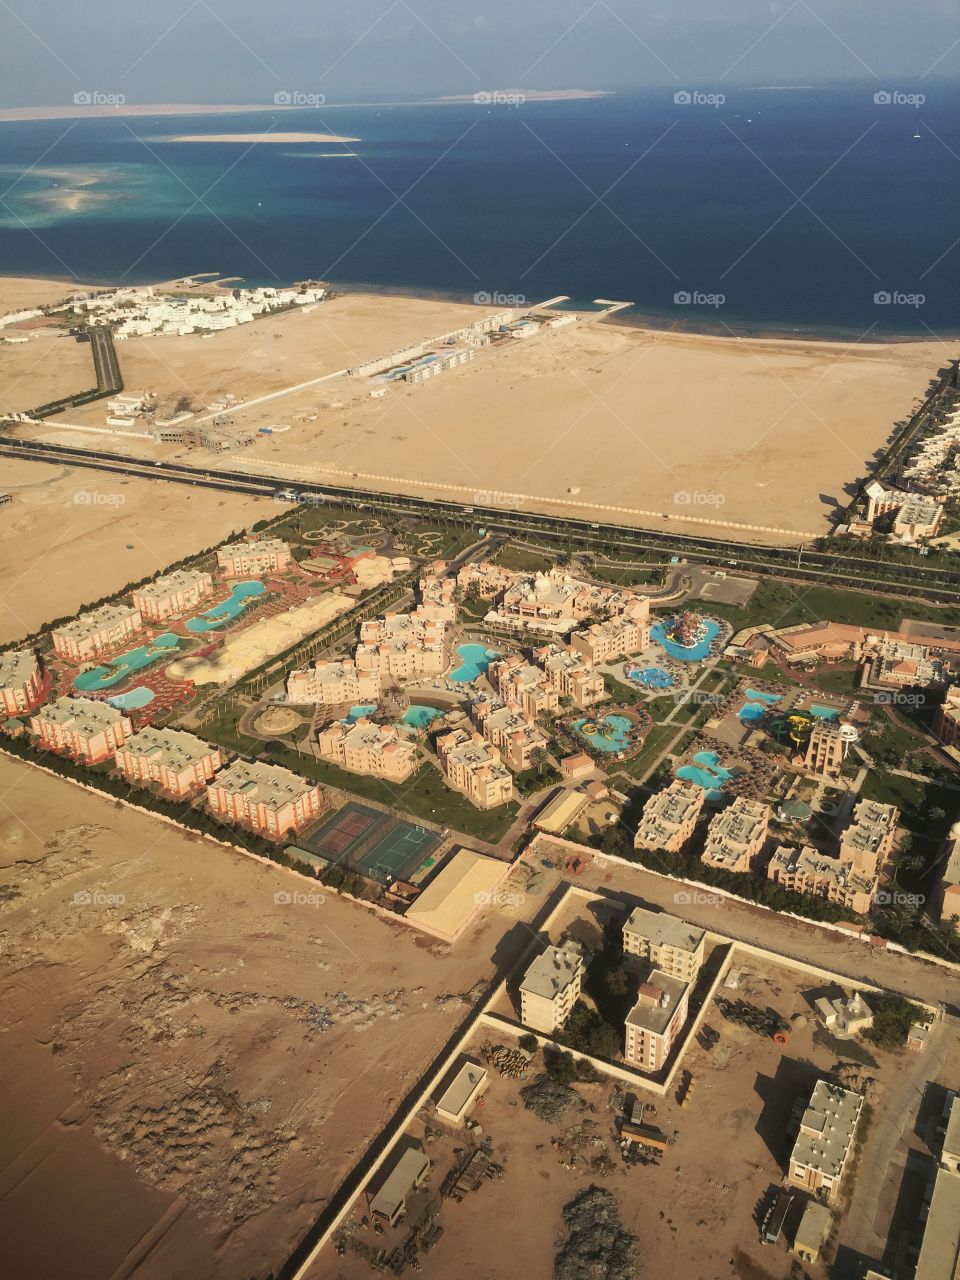 View from above on desert and hotels on the coastline